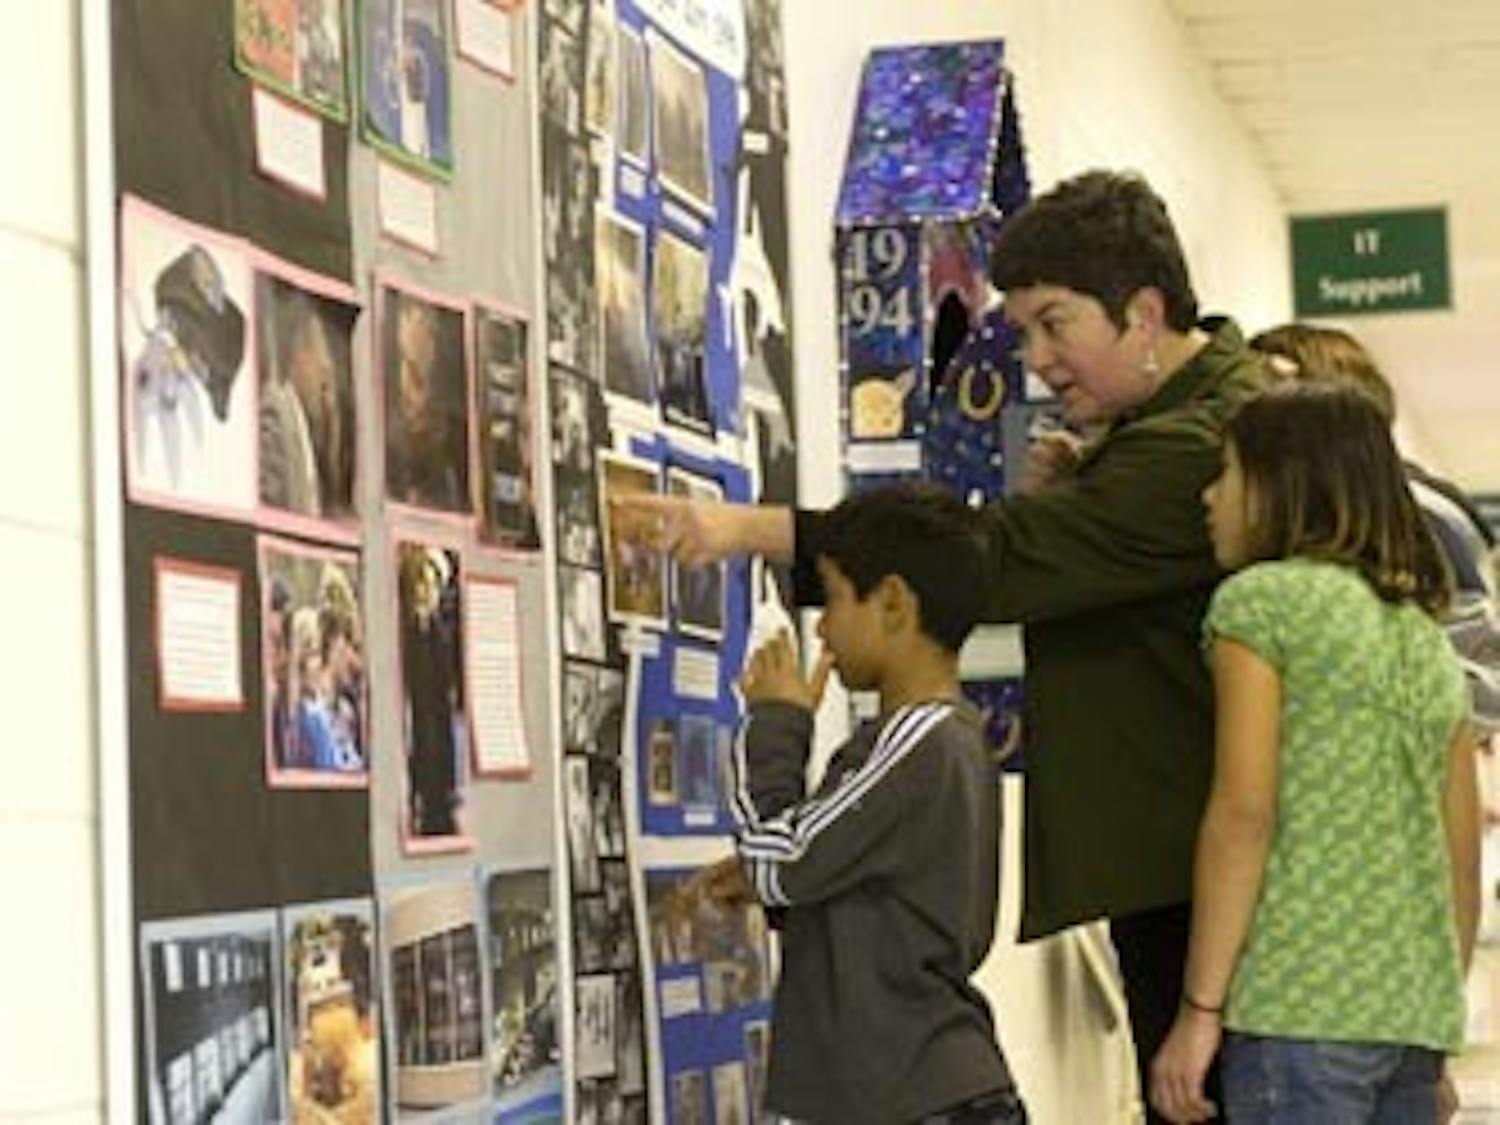 Parents and students came to an exhibit of student art celebrating the 100th Anniversary of the Carrboro School System.